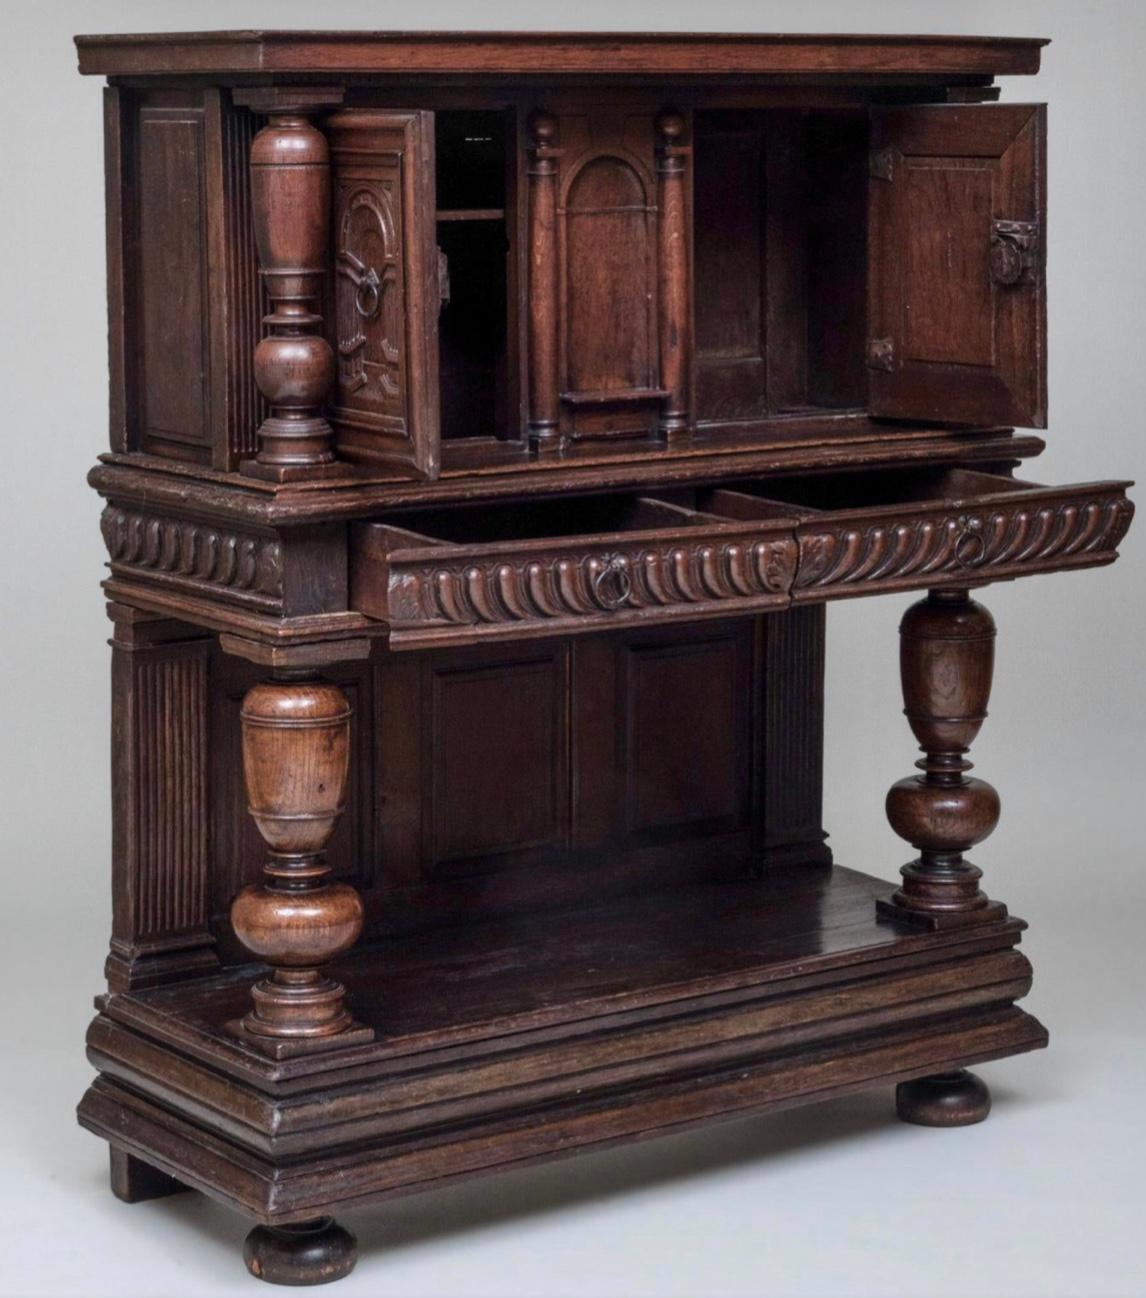 This is a fabulous quality, heavily carved solid oak court cupboard, made in England. The geometric moldings on the panels and doors are wonderfully carved. The quality and depth of all the hand carving is amazing. The turned columns add character.